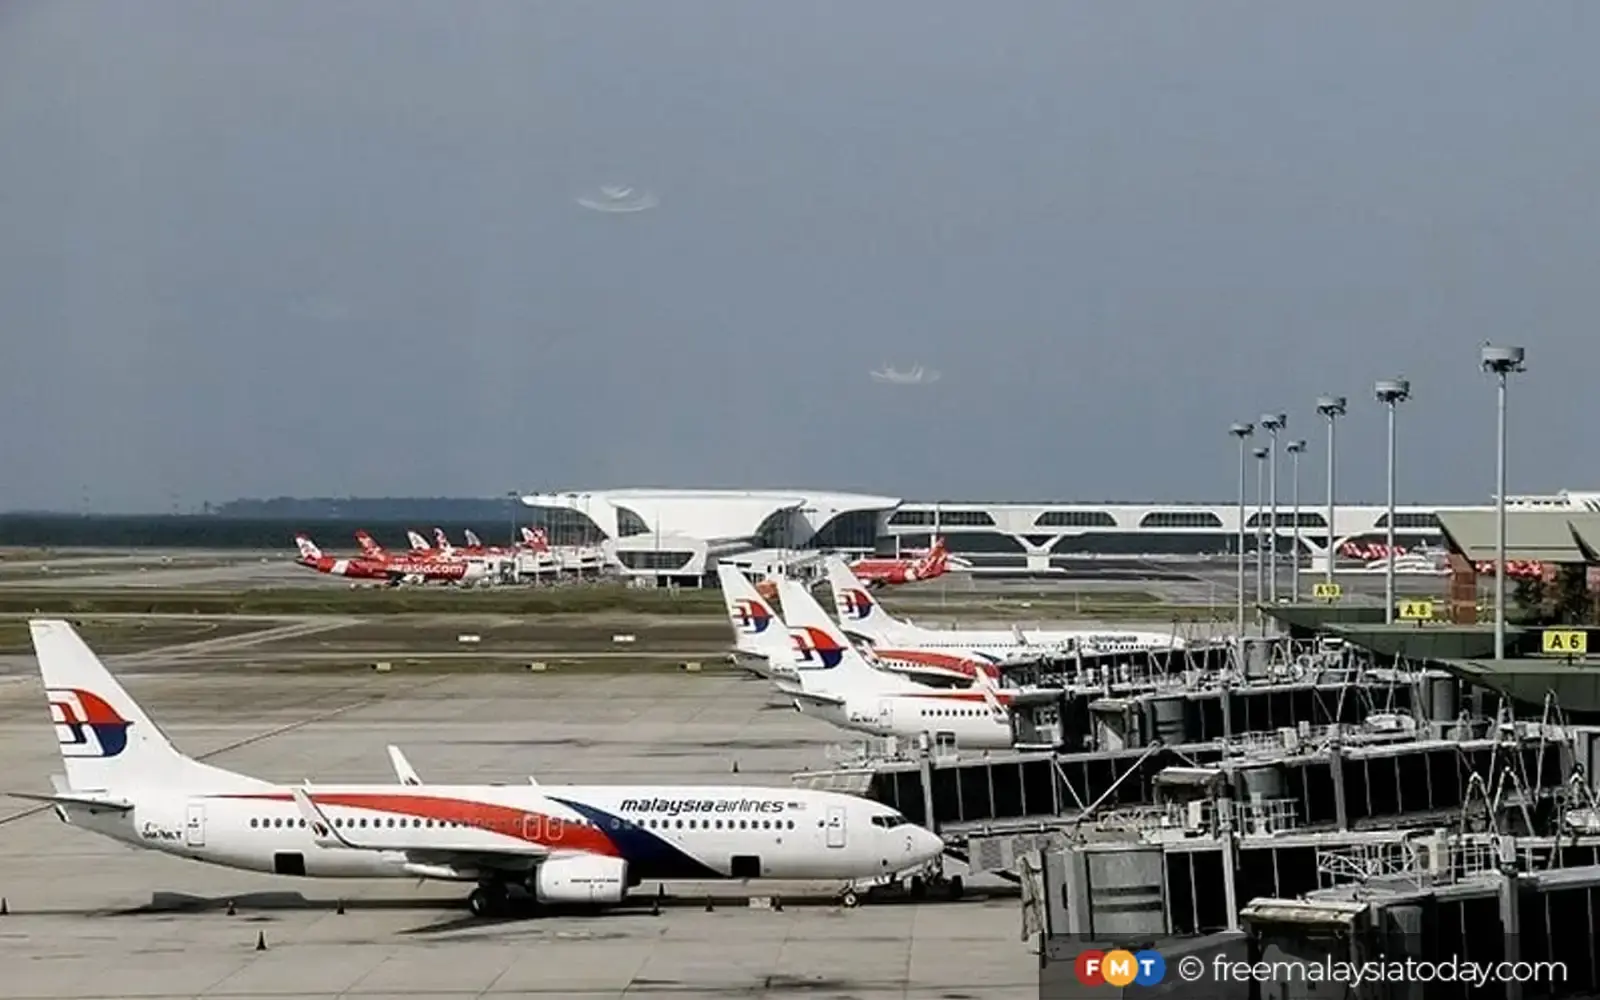 Numerous flights between KLIA and Sabah, as well as Sarawak, have been cancelled due to a volcanic eruption at Mount Ruang in Indonesia.